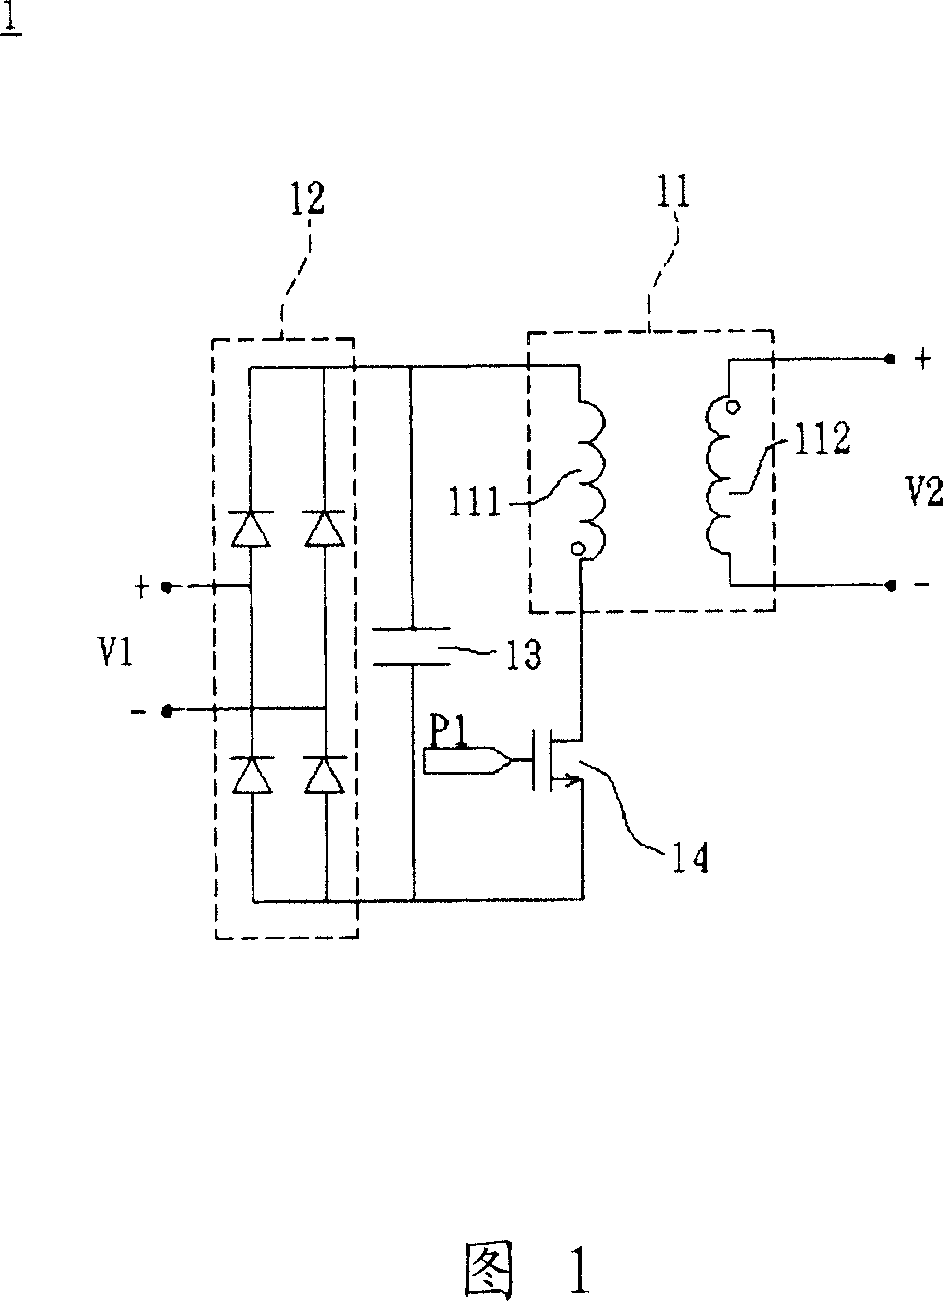 Power source converter and transformer